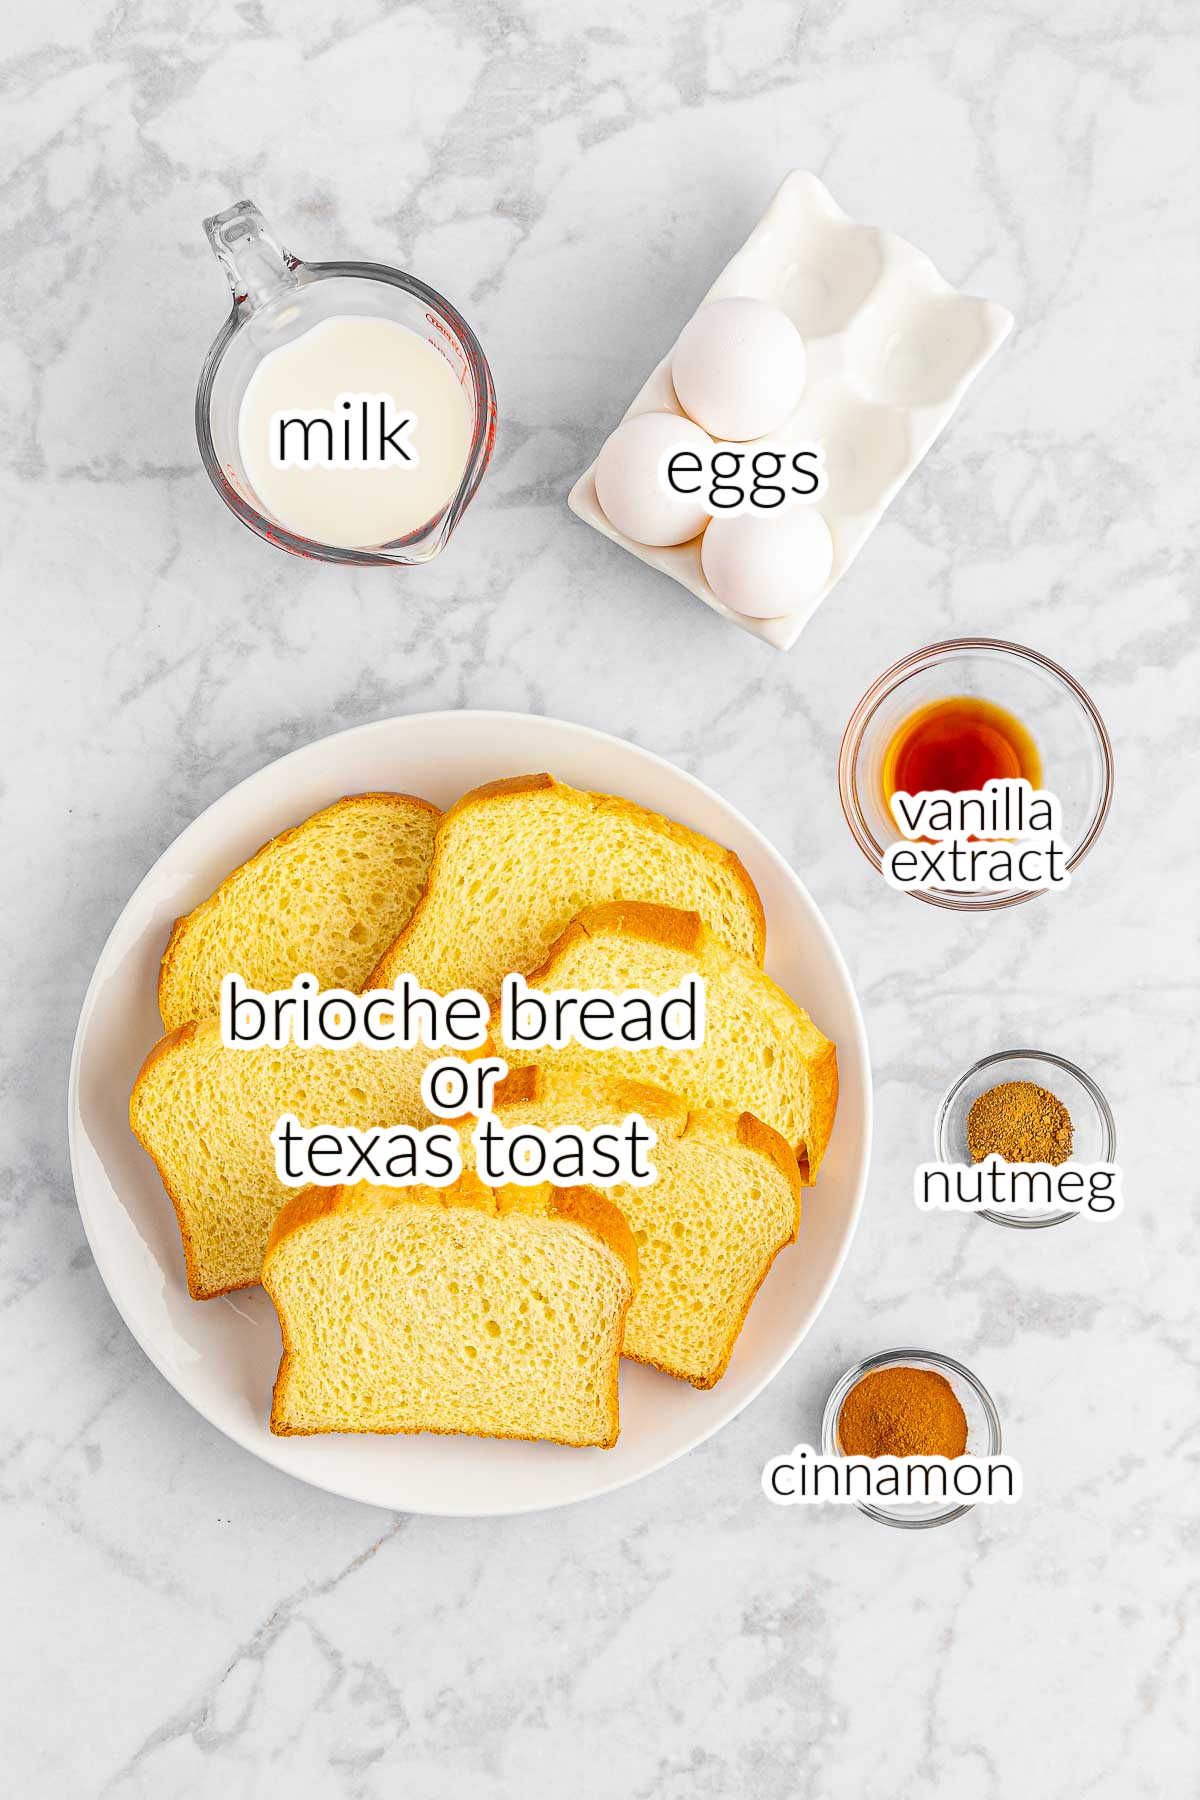 Ingredients for air fryer french toast - milk, eggs, thick bread, vanilla extract, nutmeg and cinnamon.